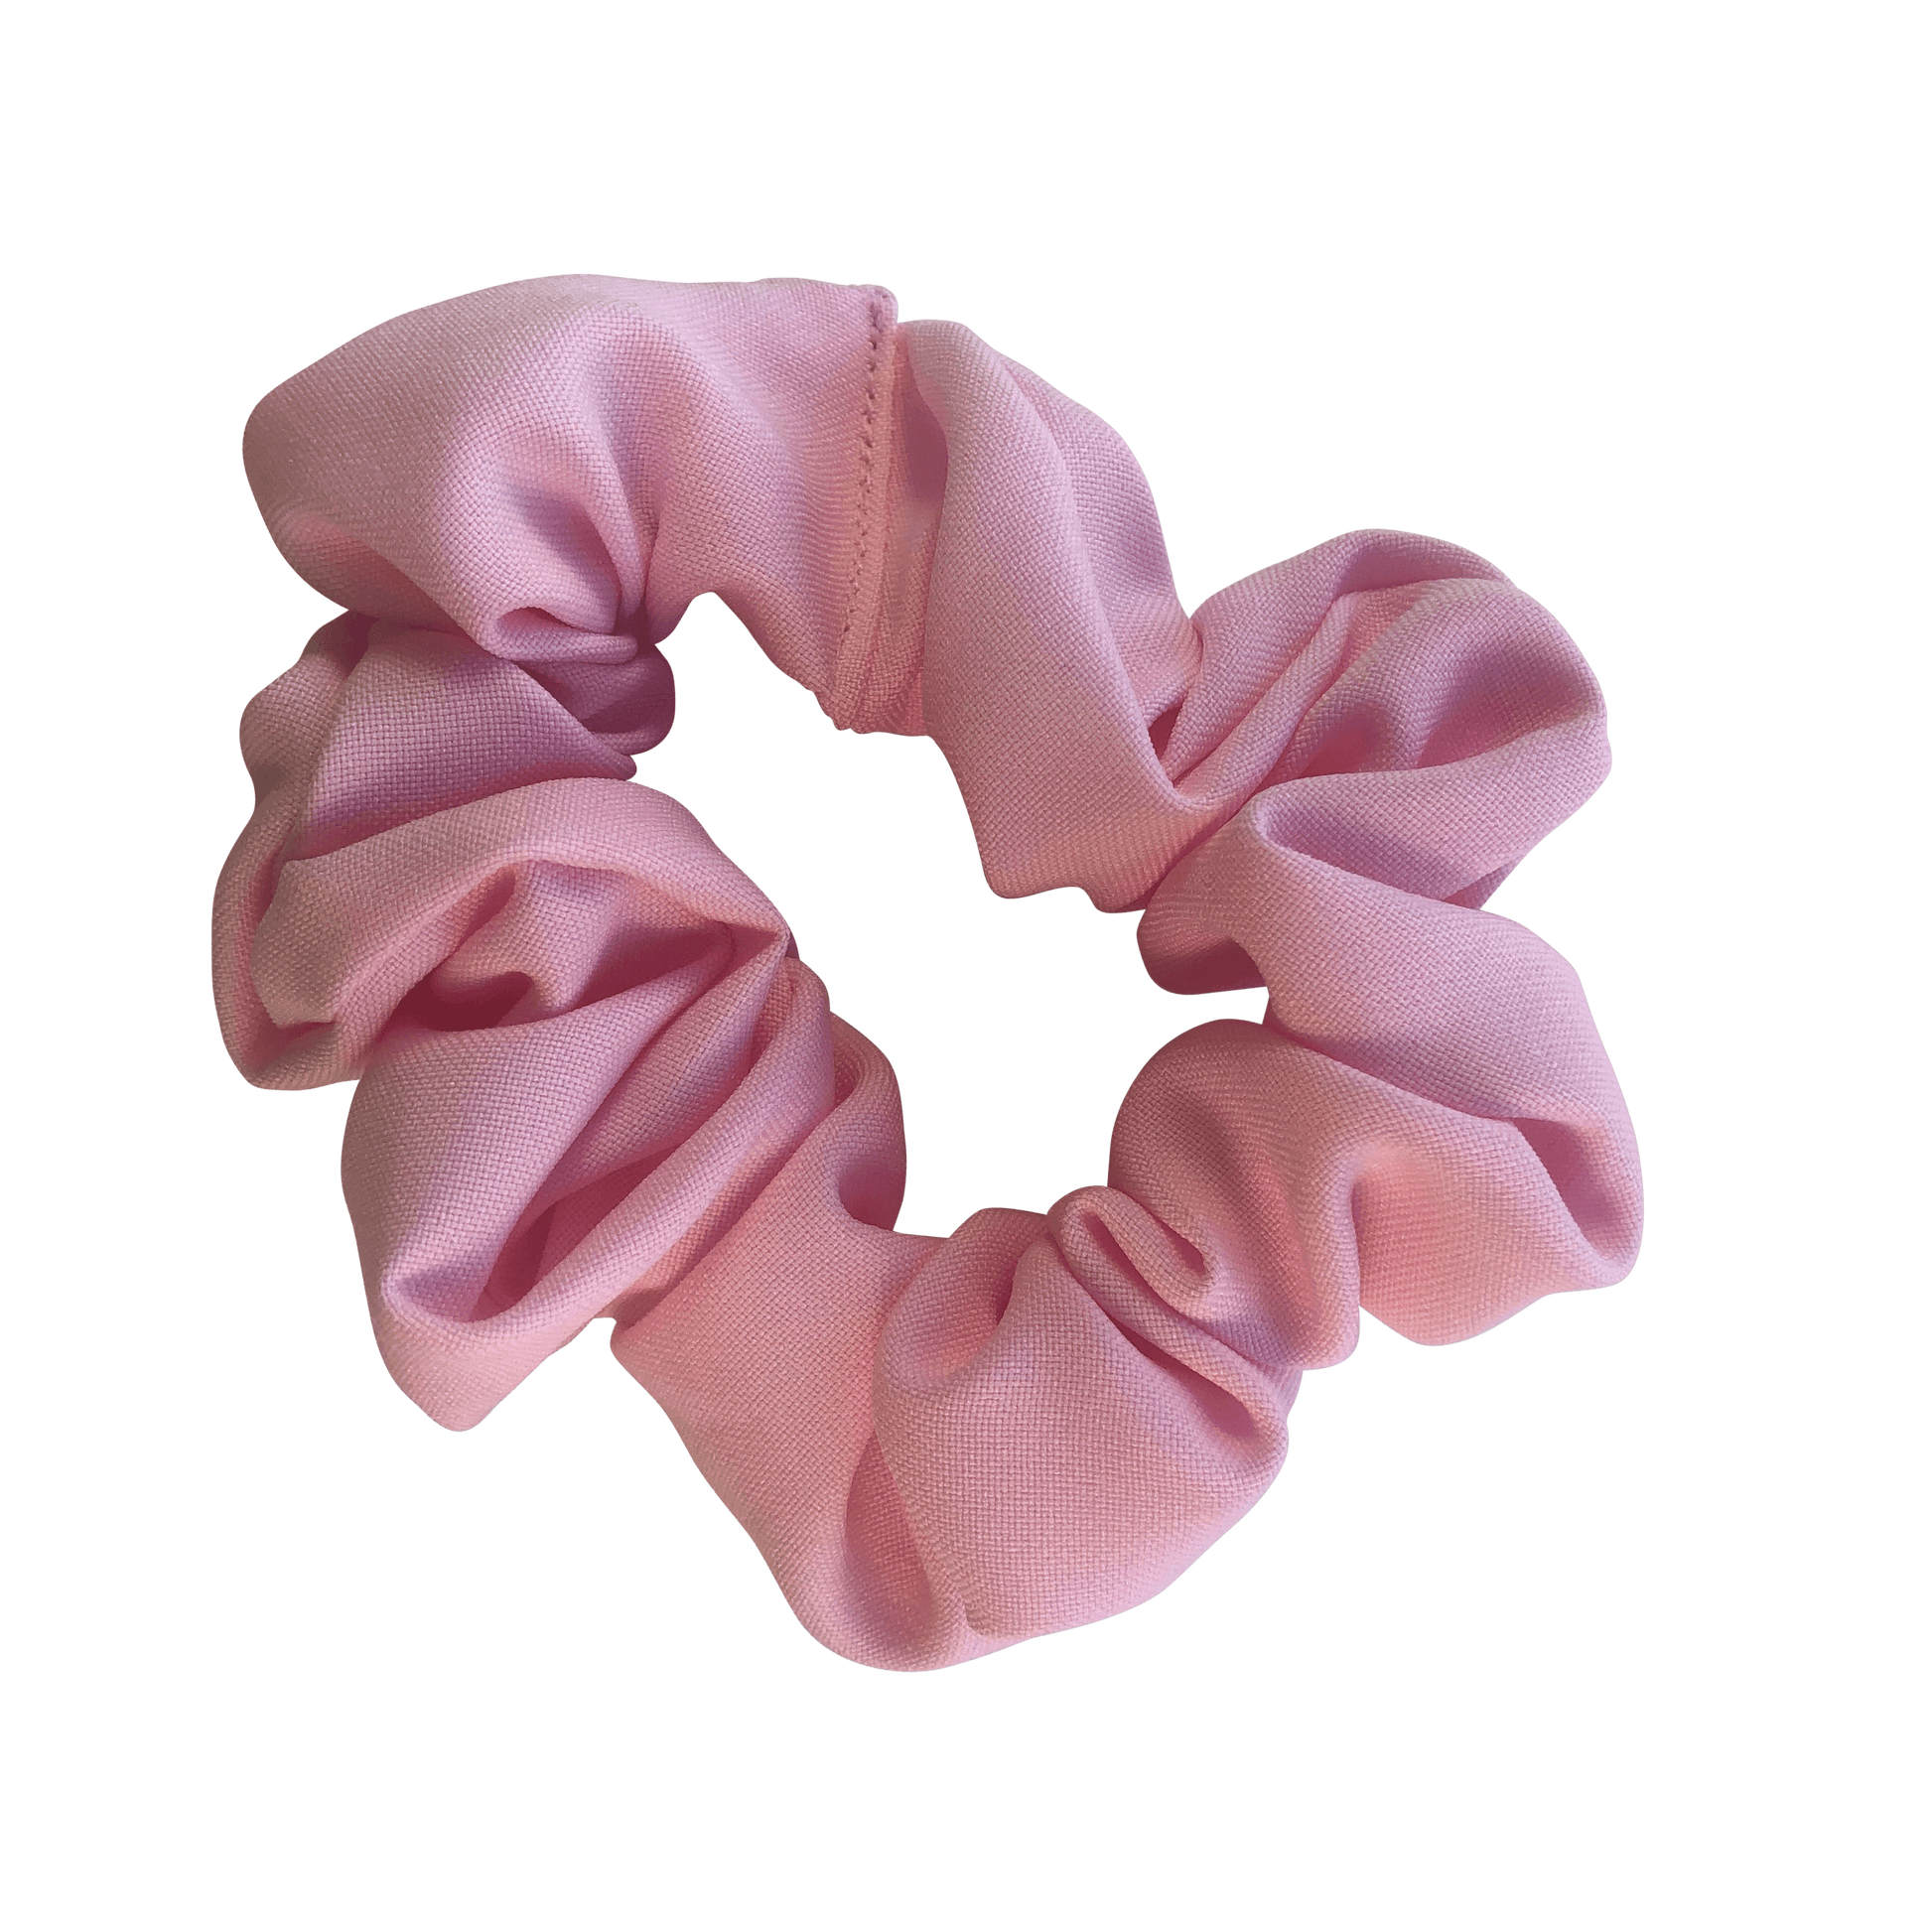 Pastel Ballet Pink Hair Accessories - Assorted Hair Accessories - School Uniform Hair Accessories - Ponytails and Fairytales